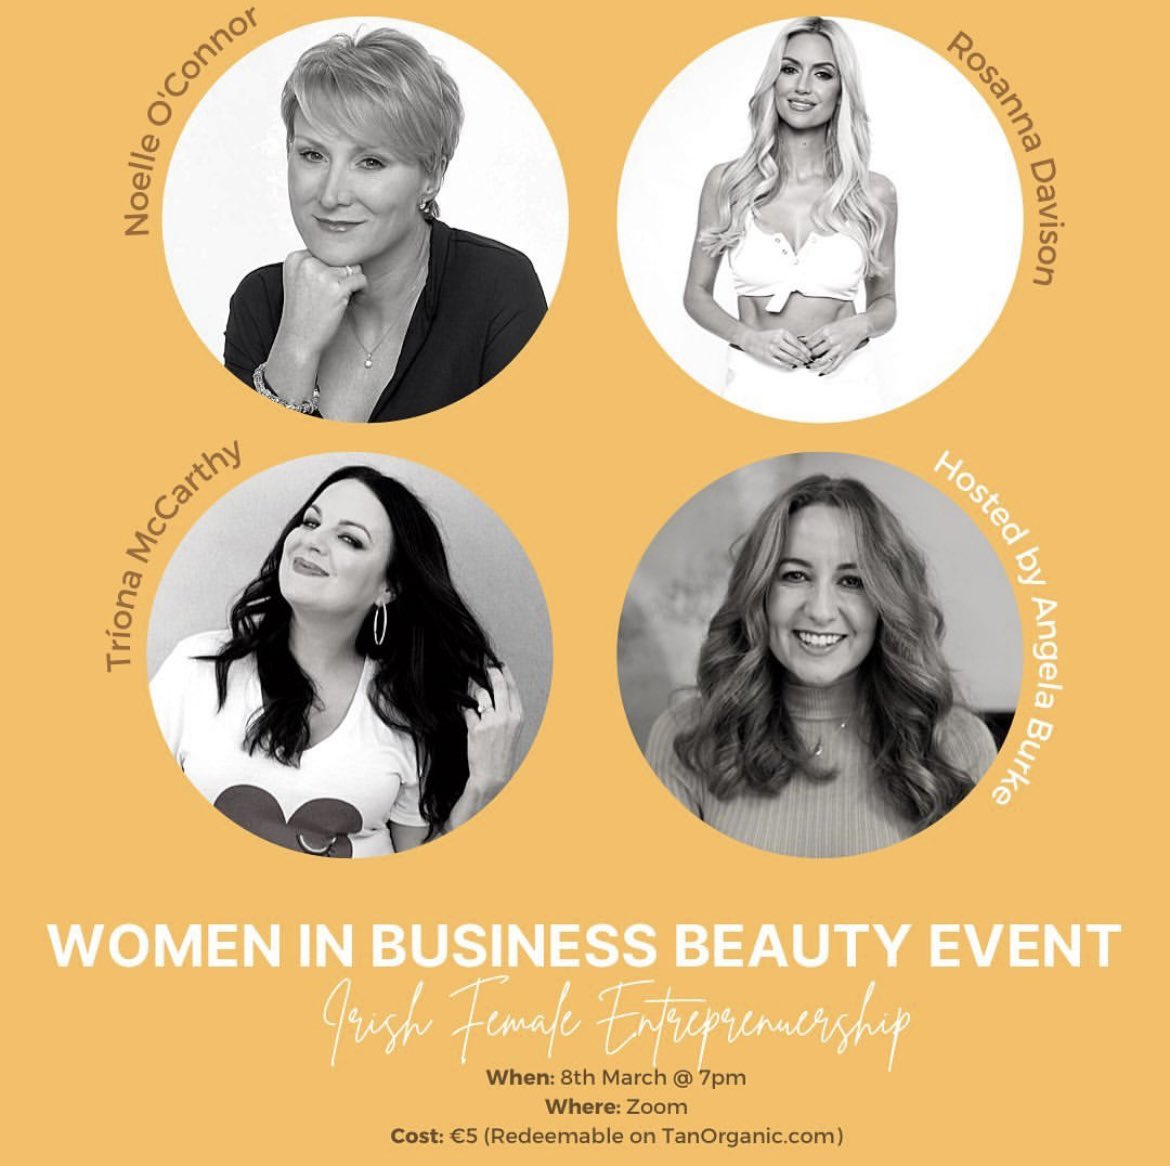 We’re hosting an exclusive Women in Business event to celebrate International Women’s Day 💪🏼 Hosted by career expert Angela Burke, she’ll be interviewing some of Ireland’s most successful business women 🙌🏼 You can get your hands on tickets below👇🏼 eventbrite.ie/e/women-in-bus…